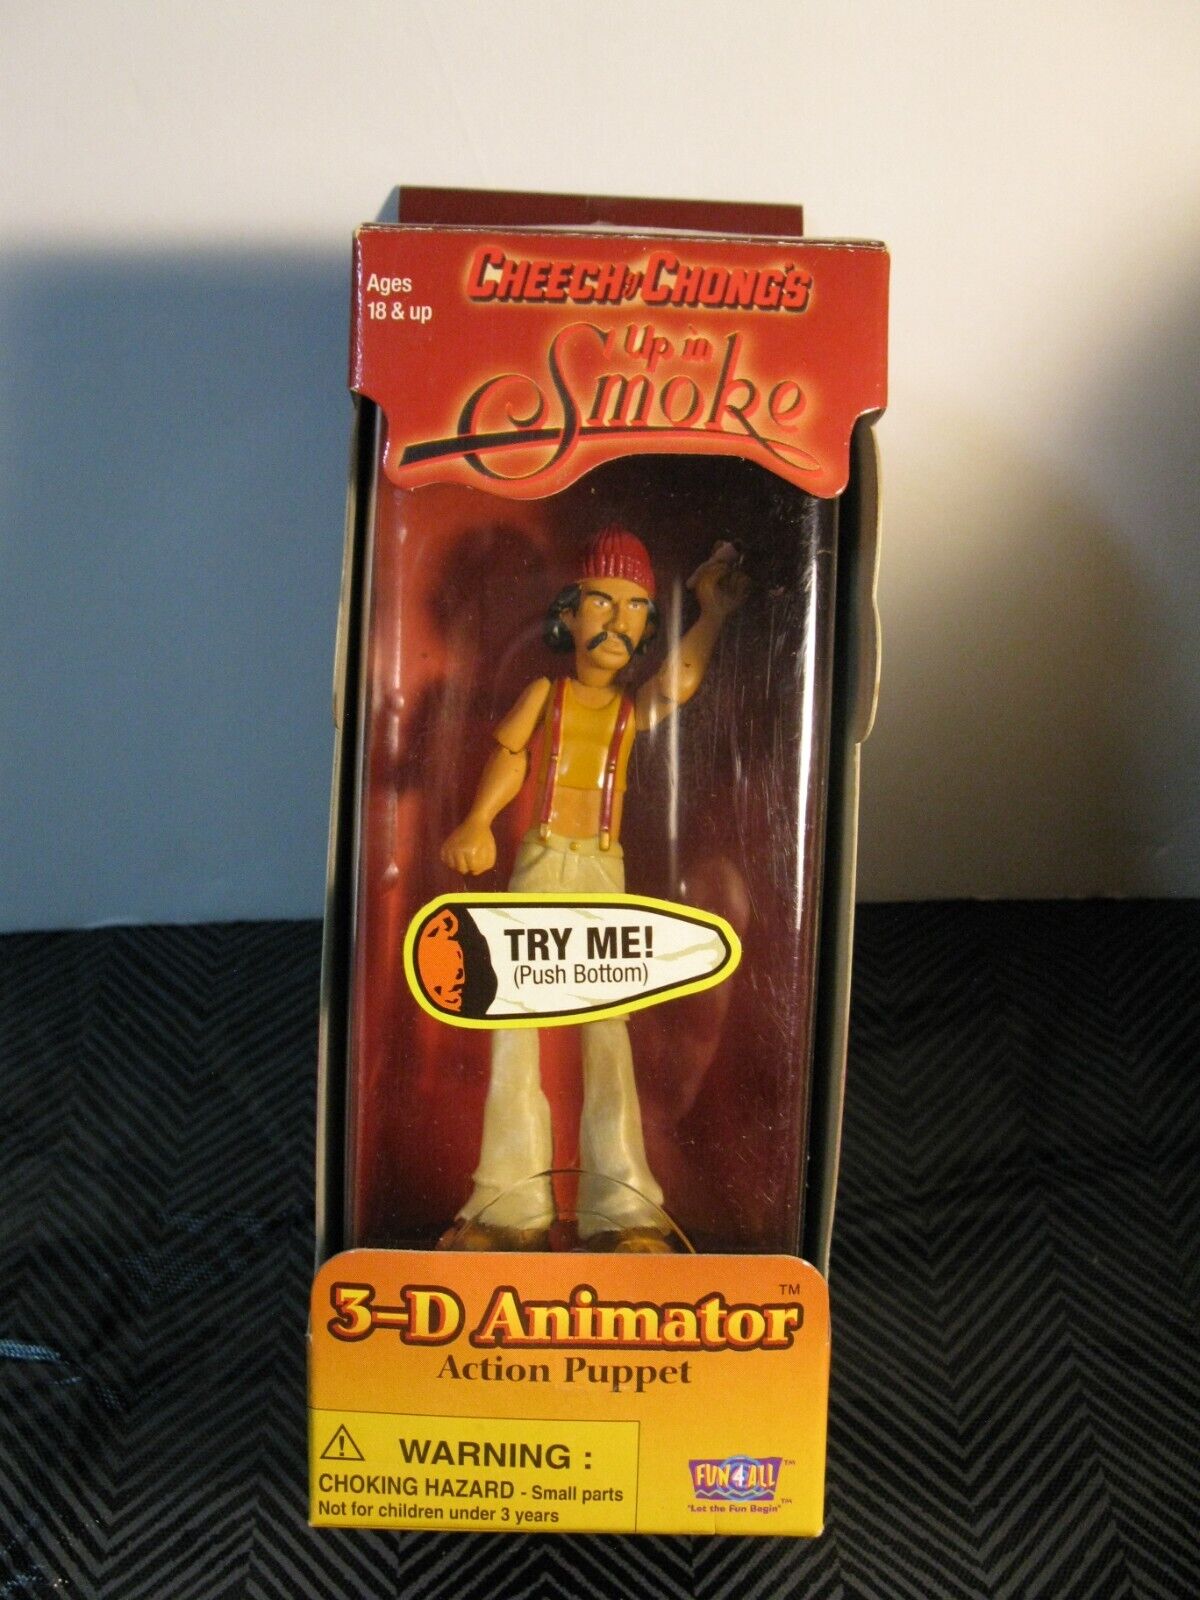 UP IN SMOKE CHEECH ACTION PUPPET